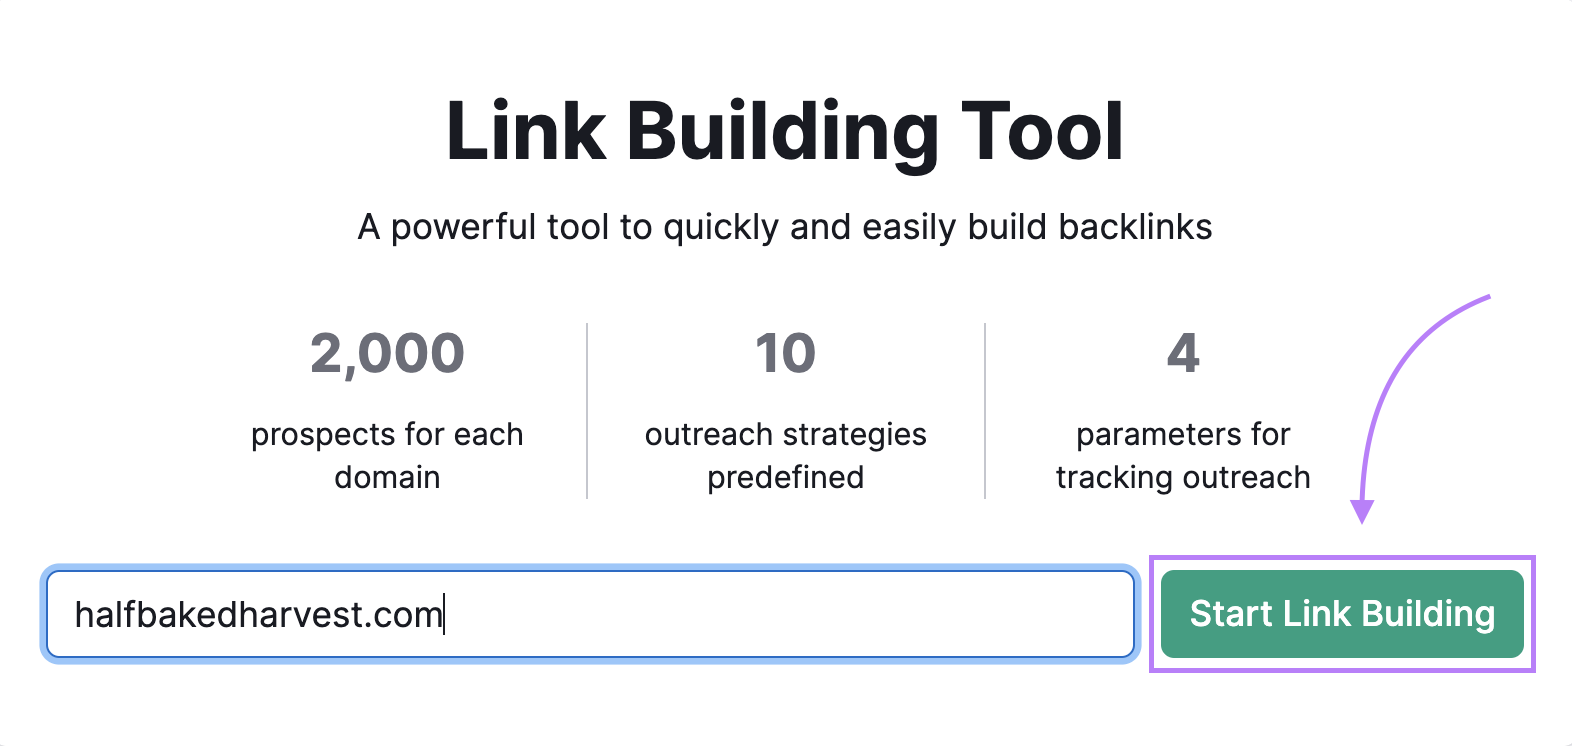 "halfbakedhafvest.com" entered into the Link Building Tool search bar